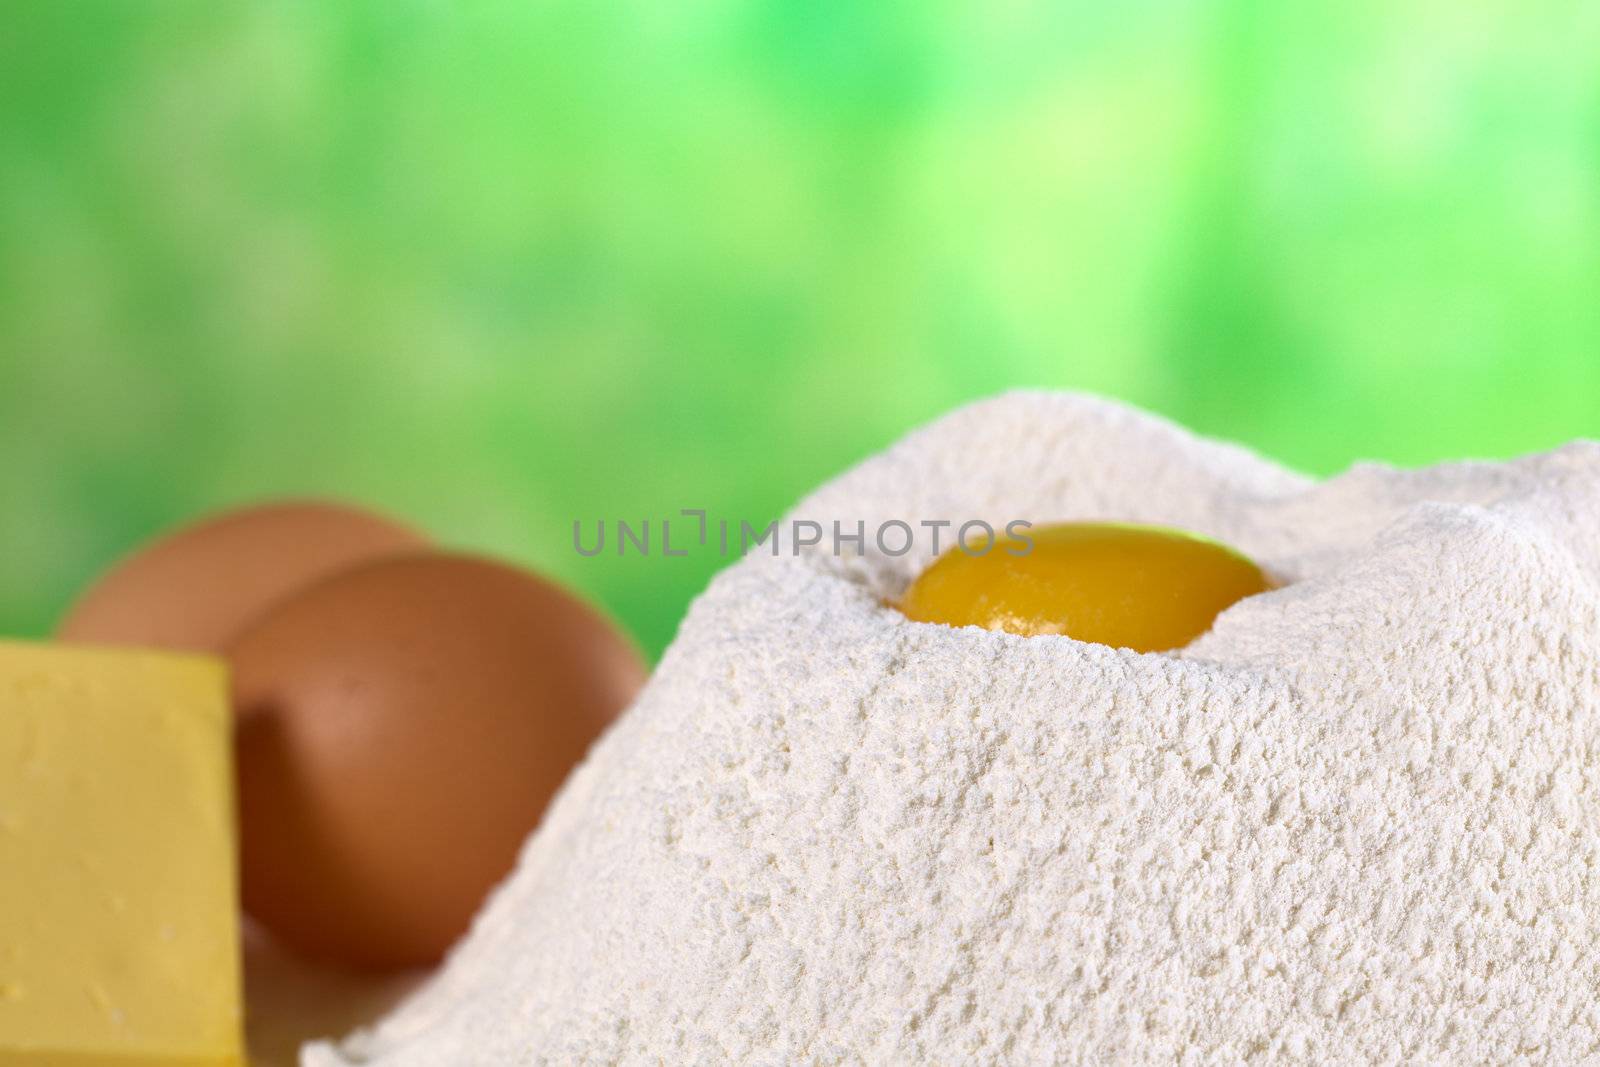 Flour with egg yolk in the middle surrounded with butter and eggs on the side (Selective Focus, Focus on the upper front edge of the flour pile)